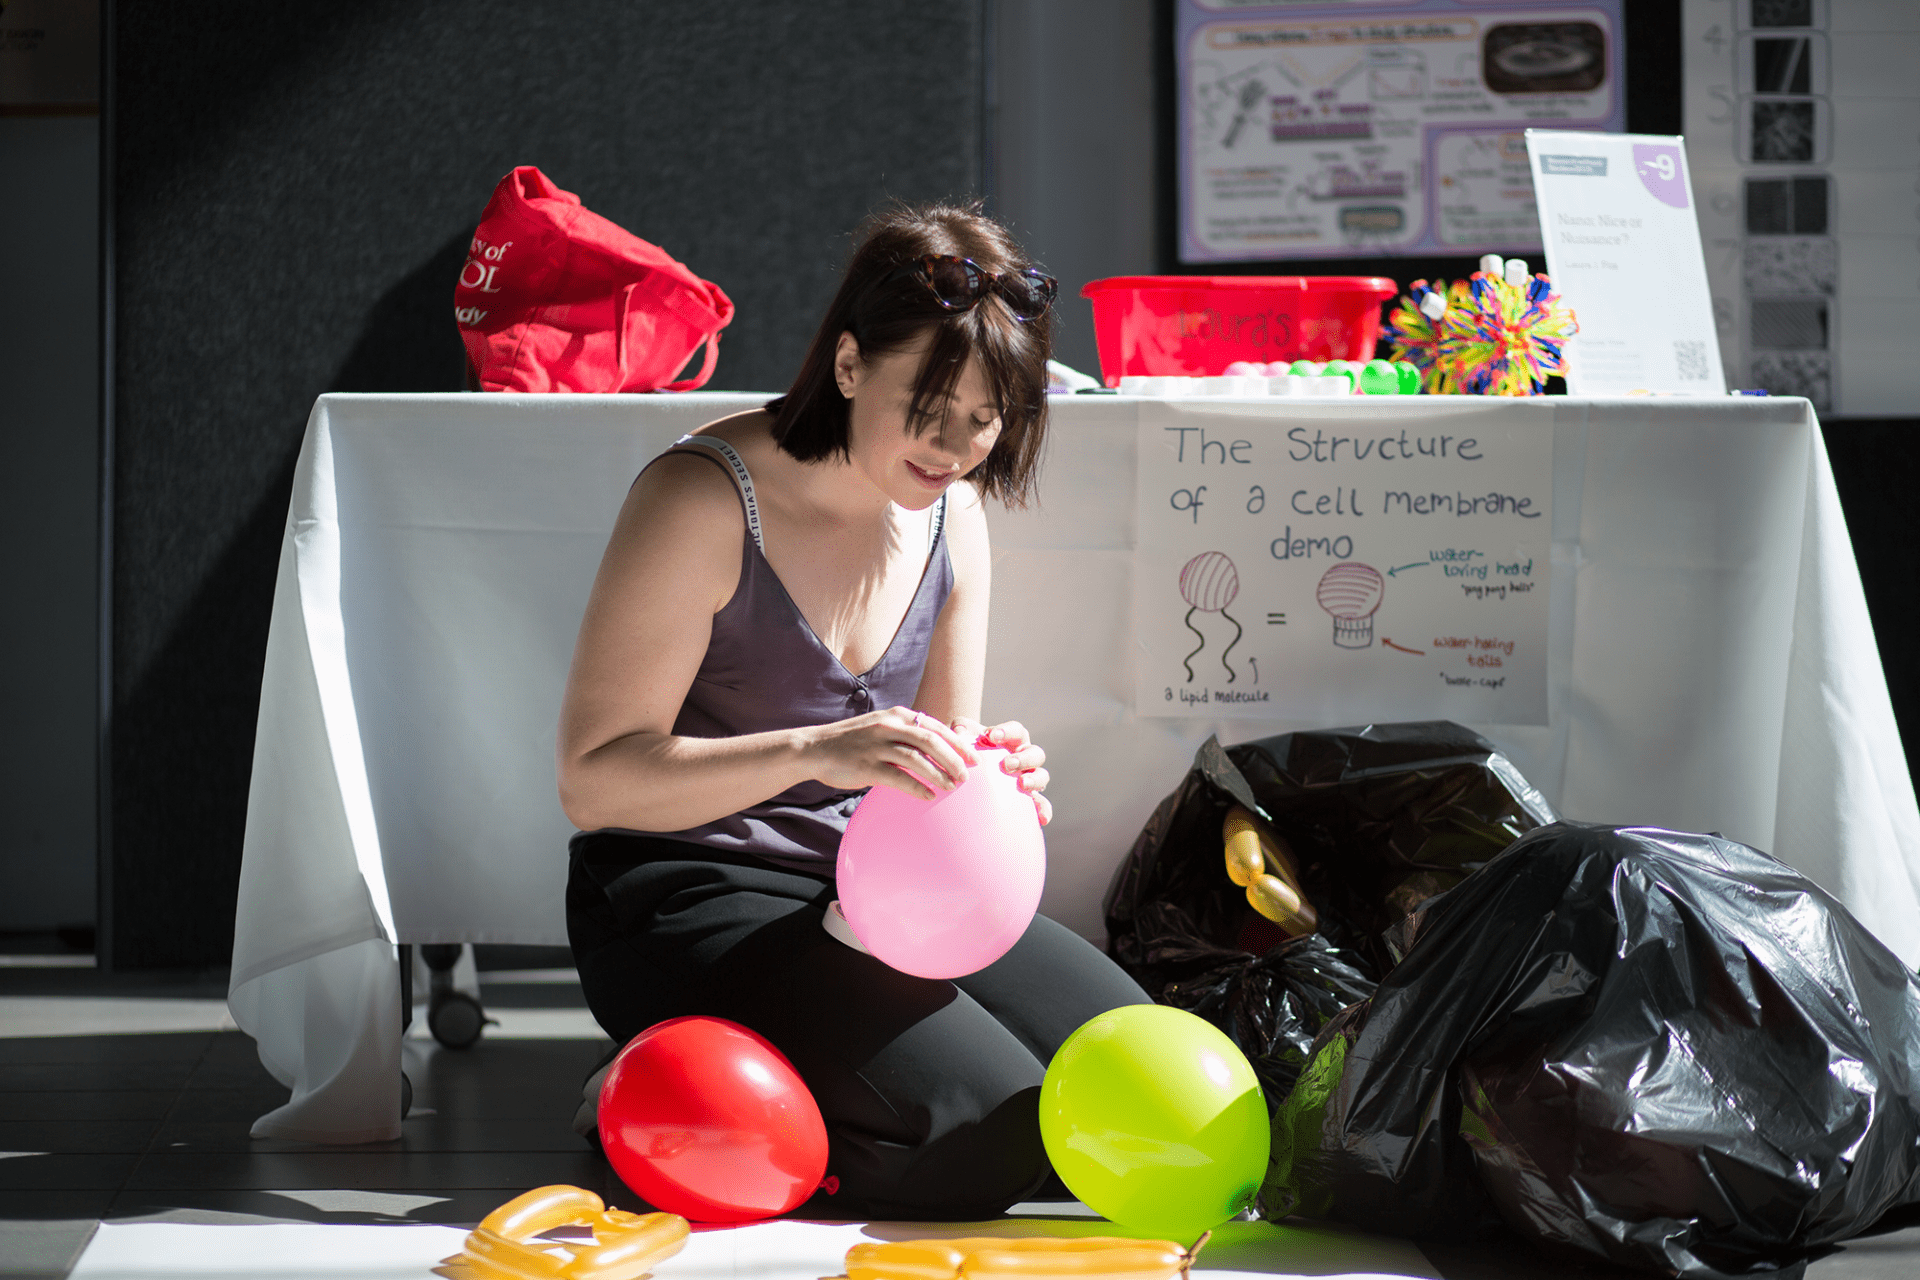 Laura Fox tying up an inflated balloon